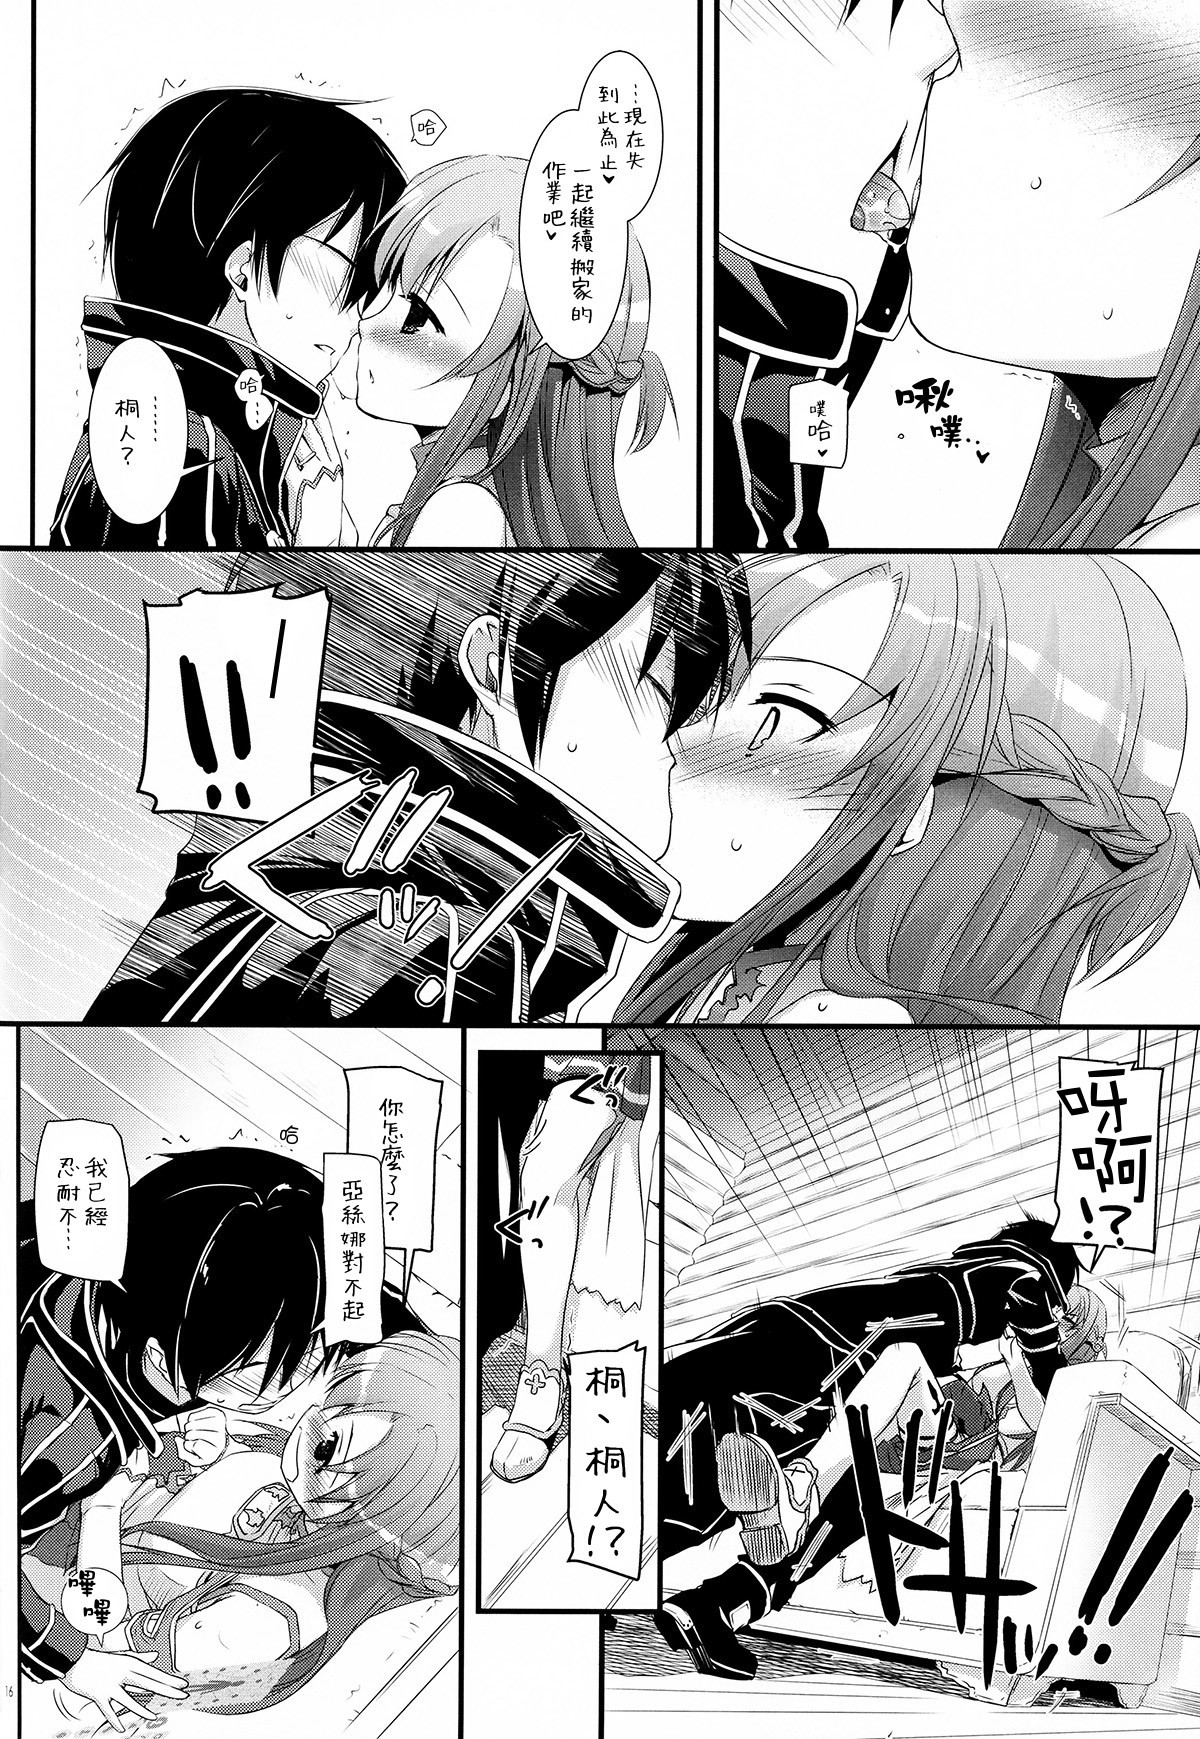 D.L. Action 71 hentai manga picture 15